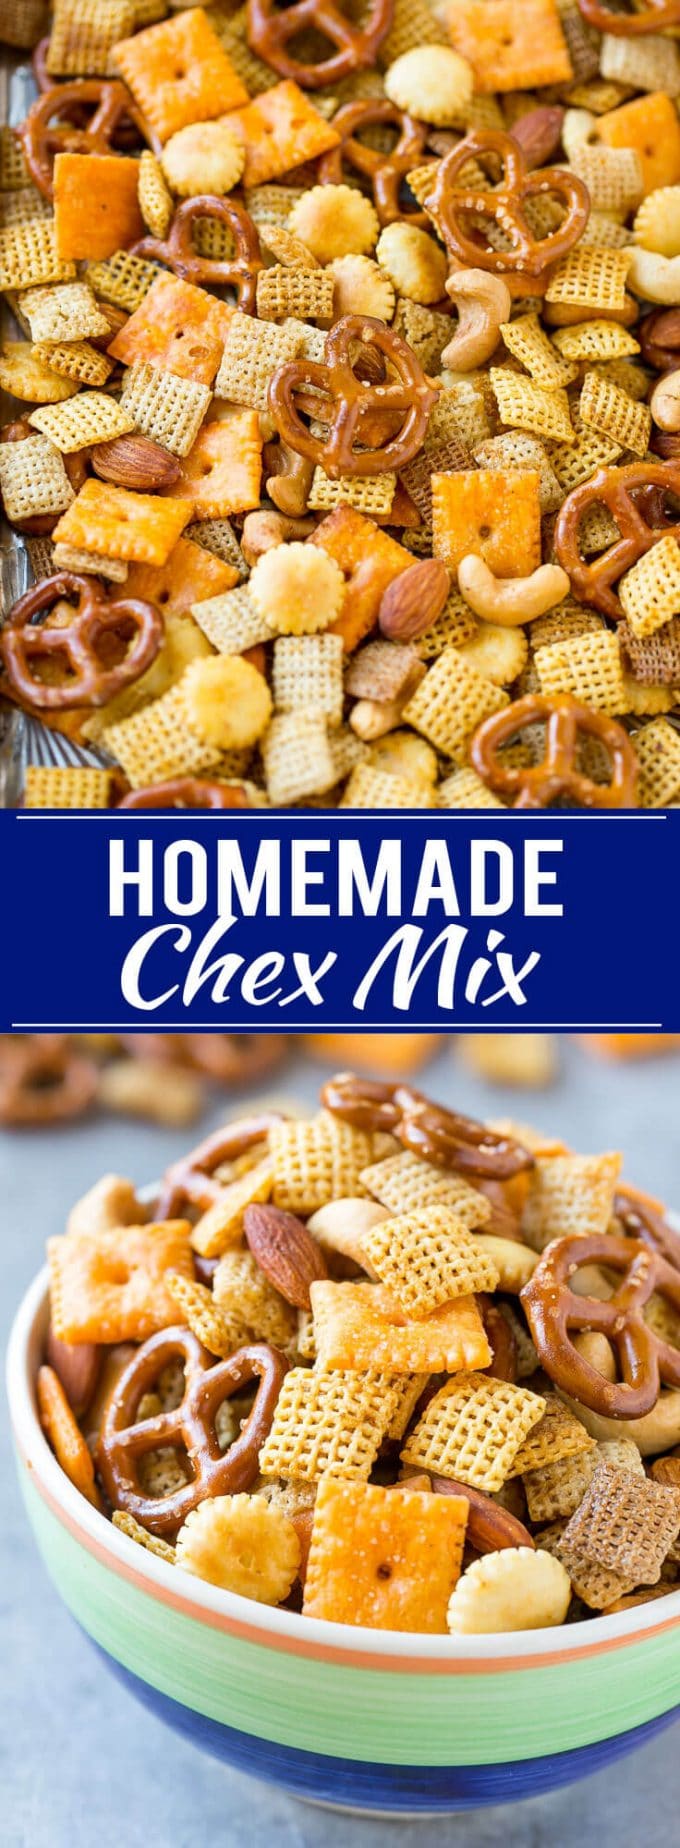 Homemade Chex Mix Recipe | Snack Mix | Party Mix | Chex Mix Recipe #chexmix #pretzels #crackers #snack #snackmix #dinneratthezoo